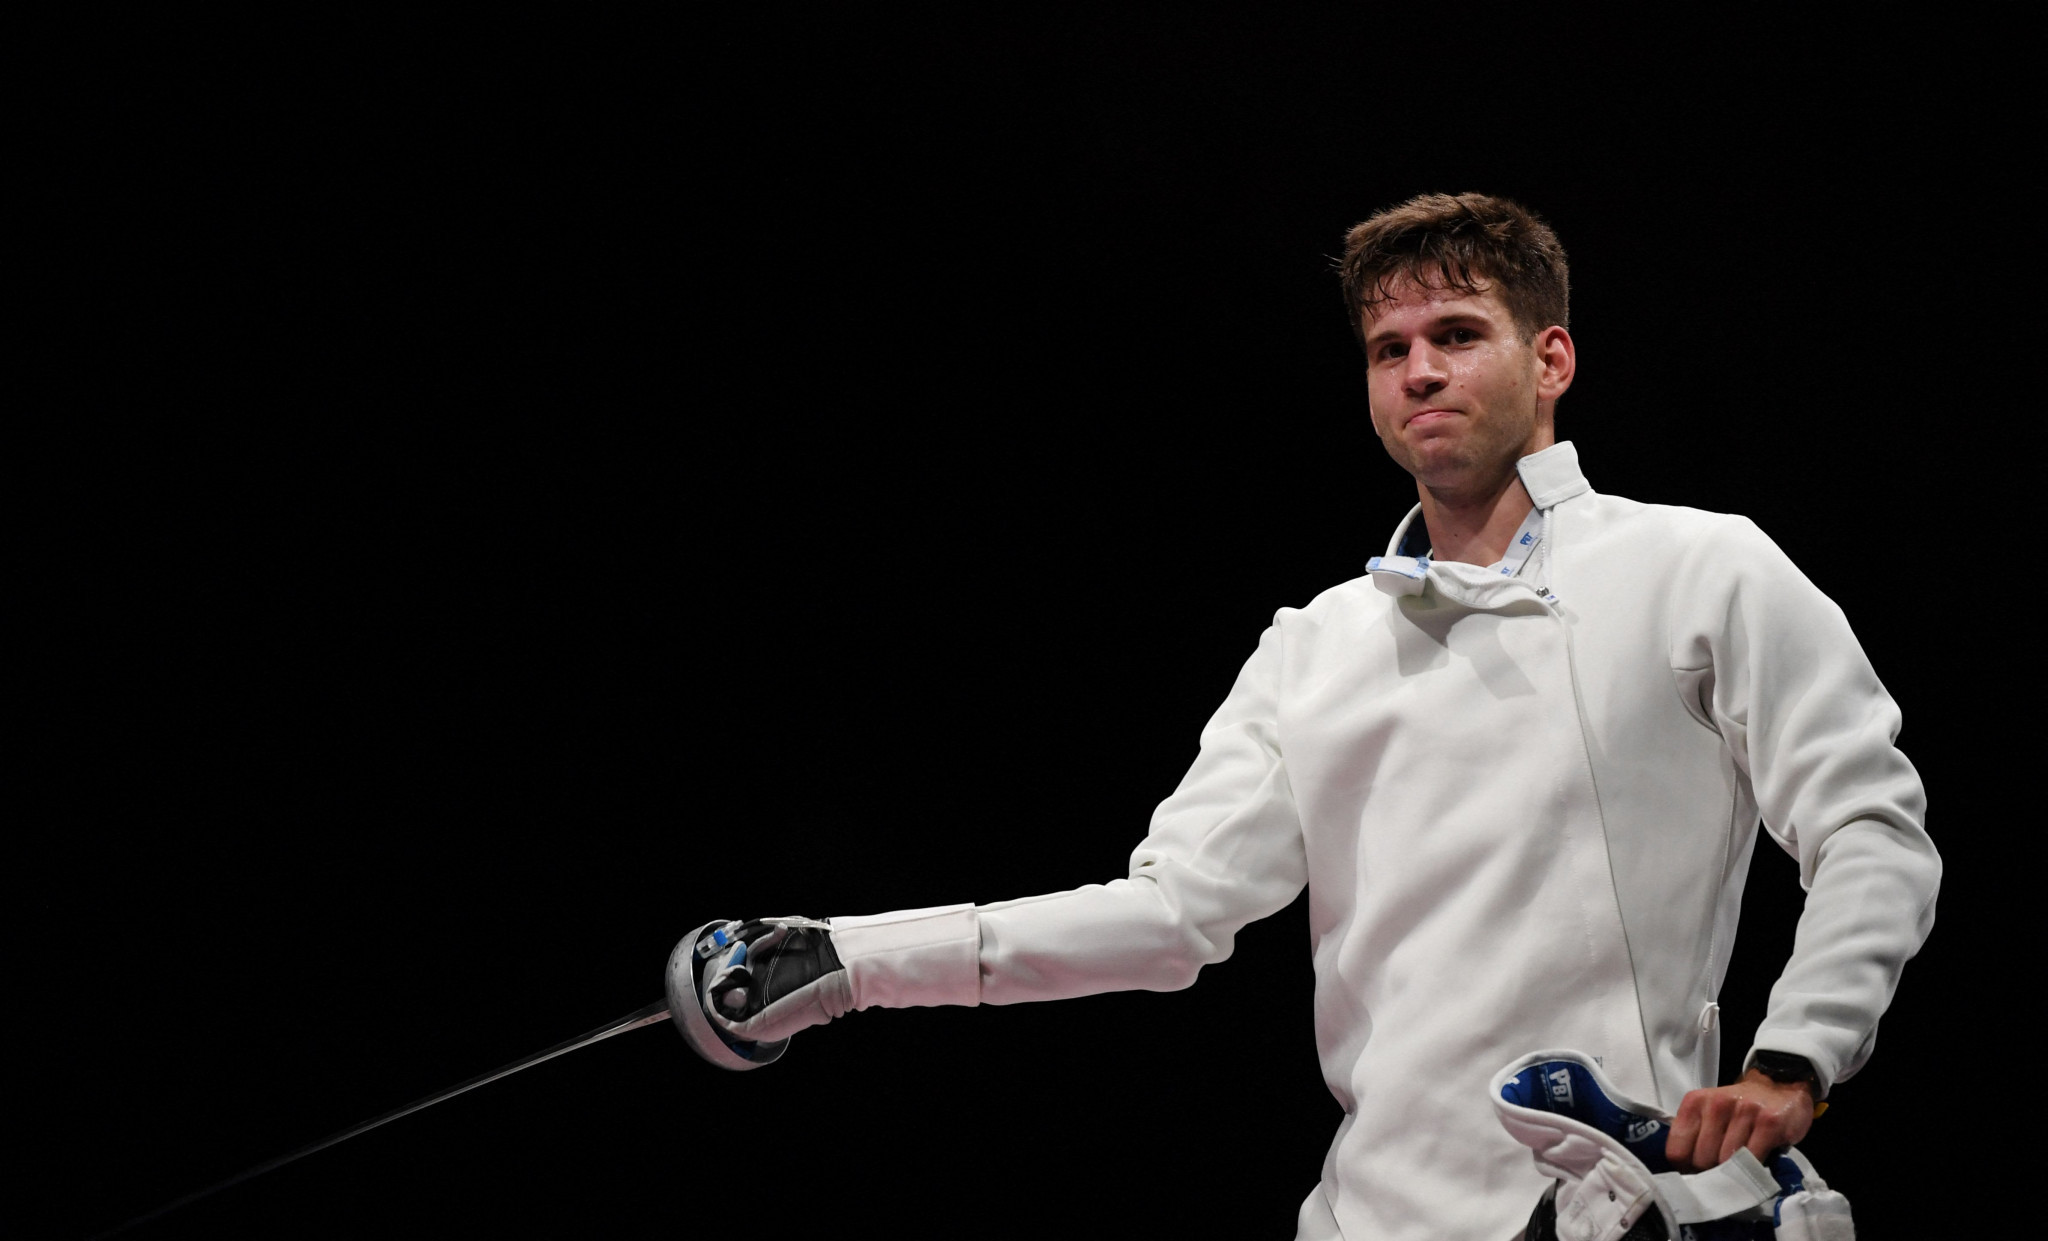 Olympic silver medallist Gergely Siklosi is the second seed for tomorrow's last 64 in the men's épée ©Getty Images